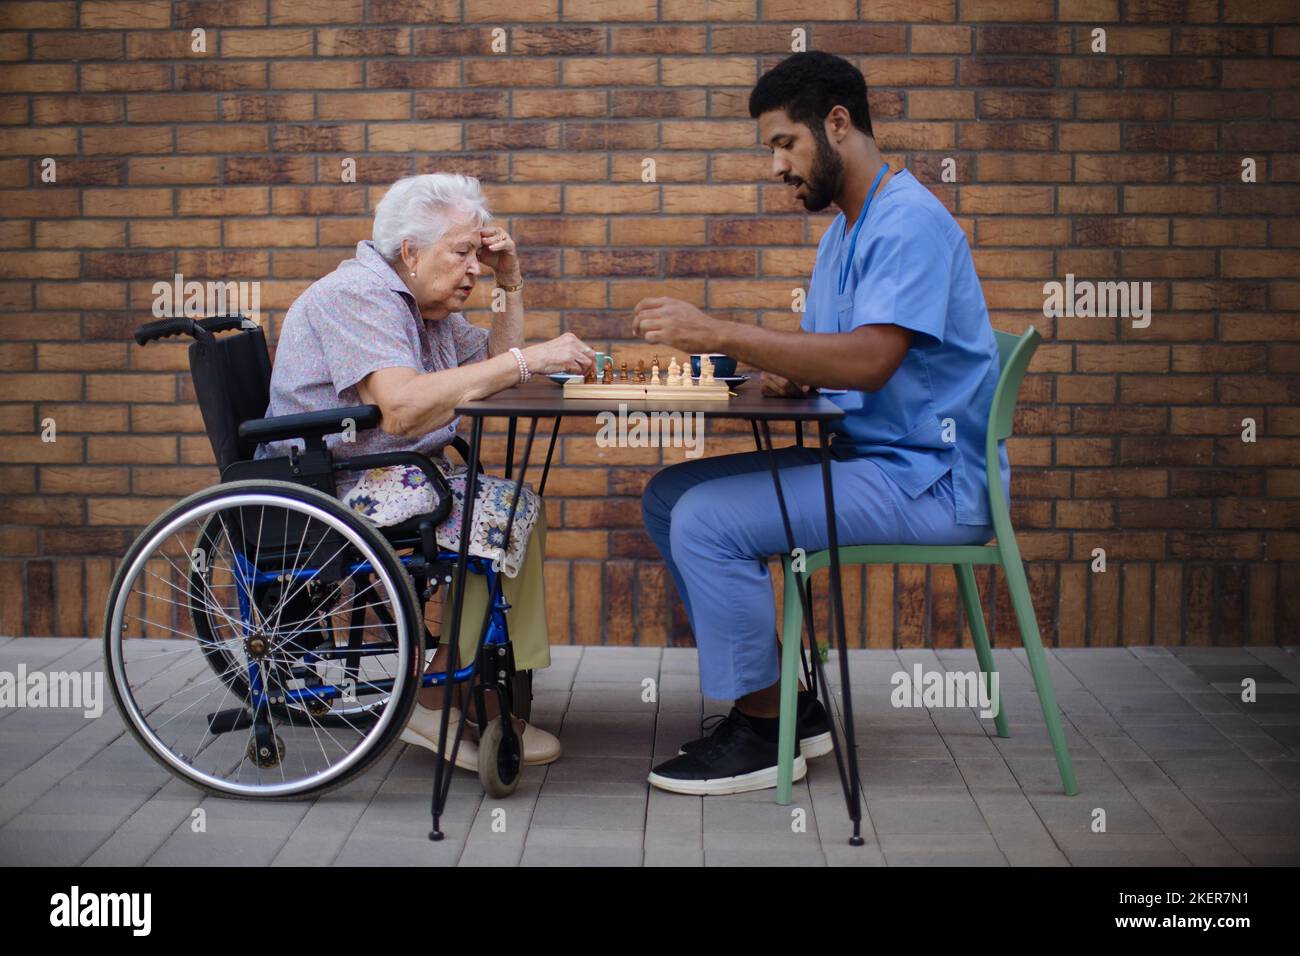 Caregiver playing chess with his client outdoor at cafe. Stock Photo